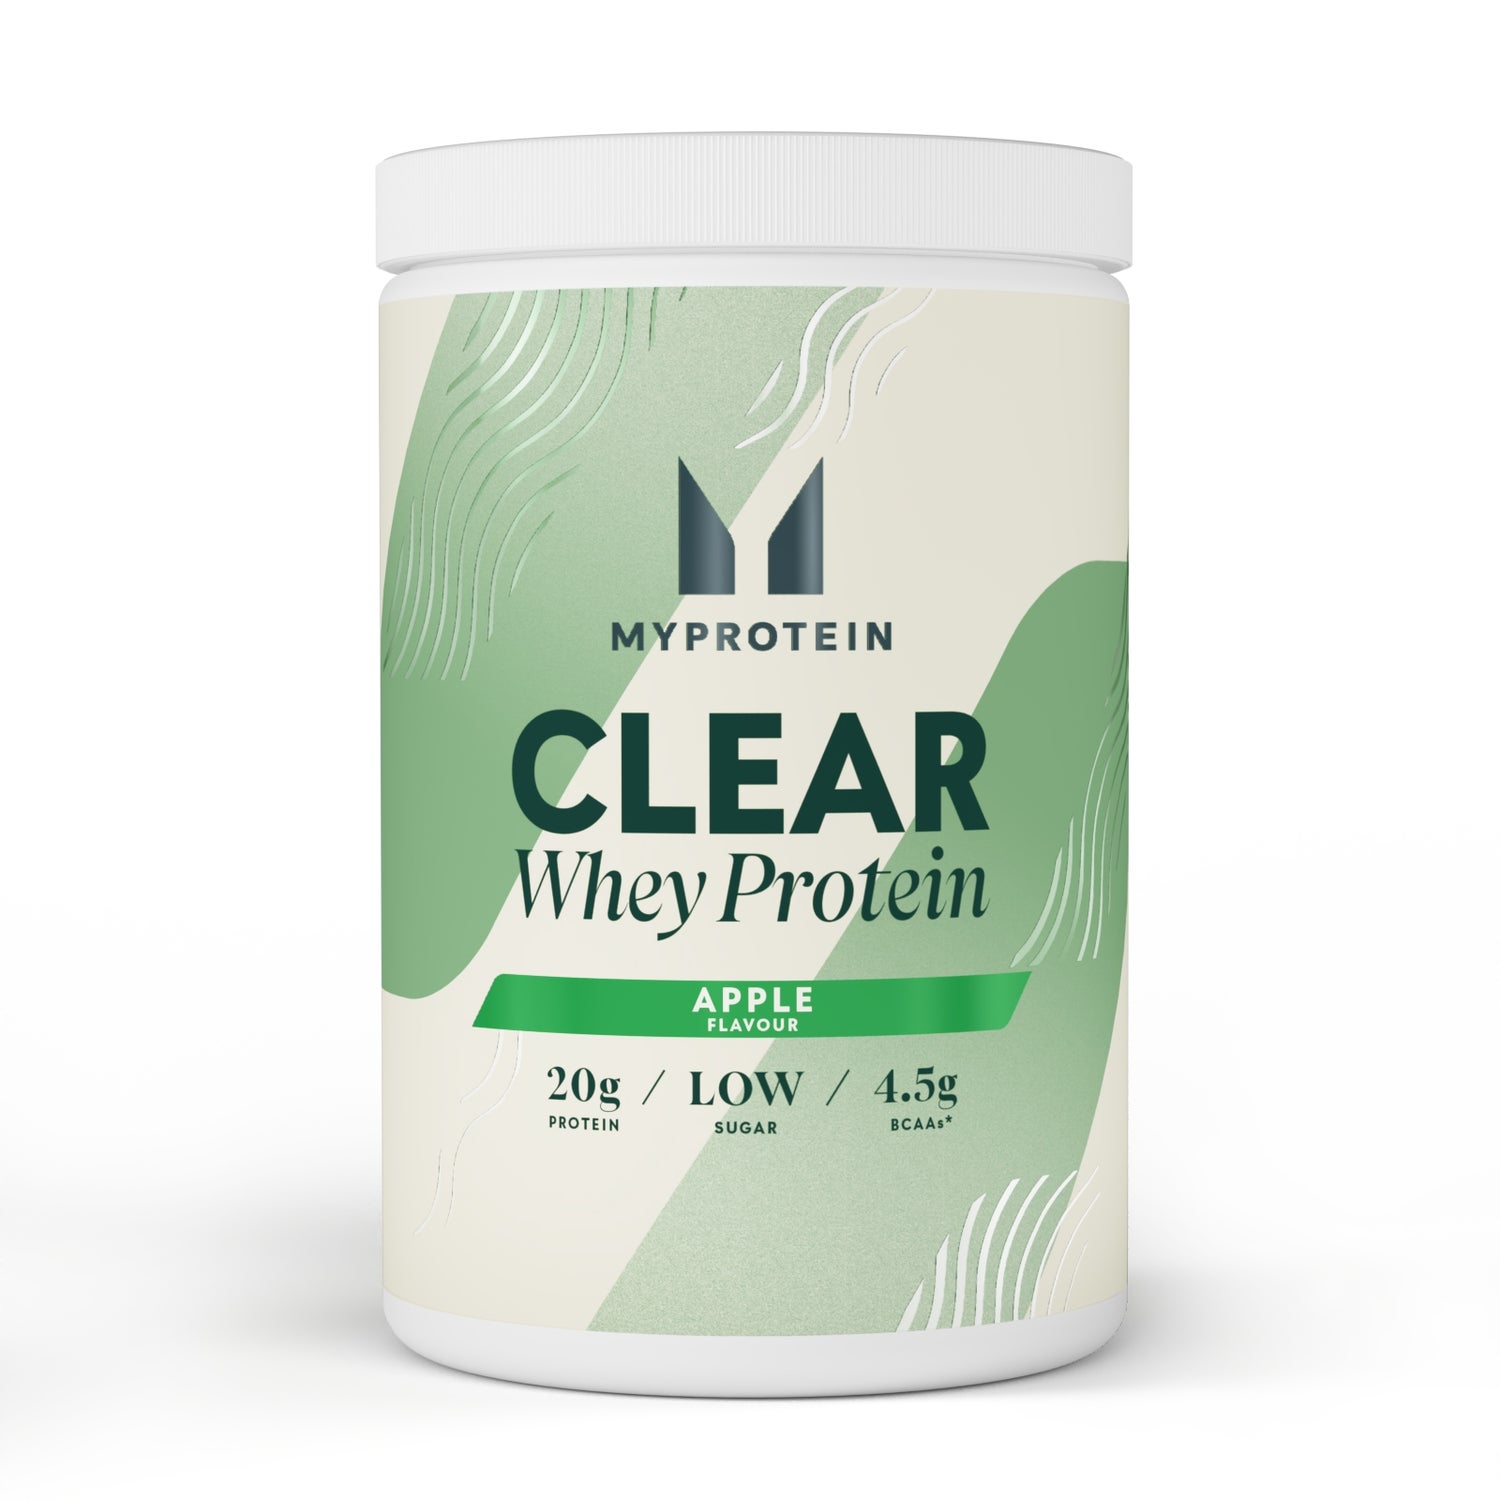 Clear Whey Isolate - 20servings - Alma